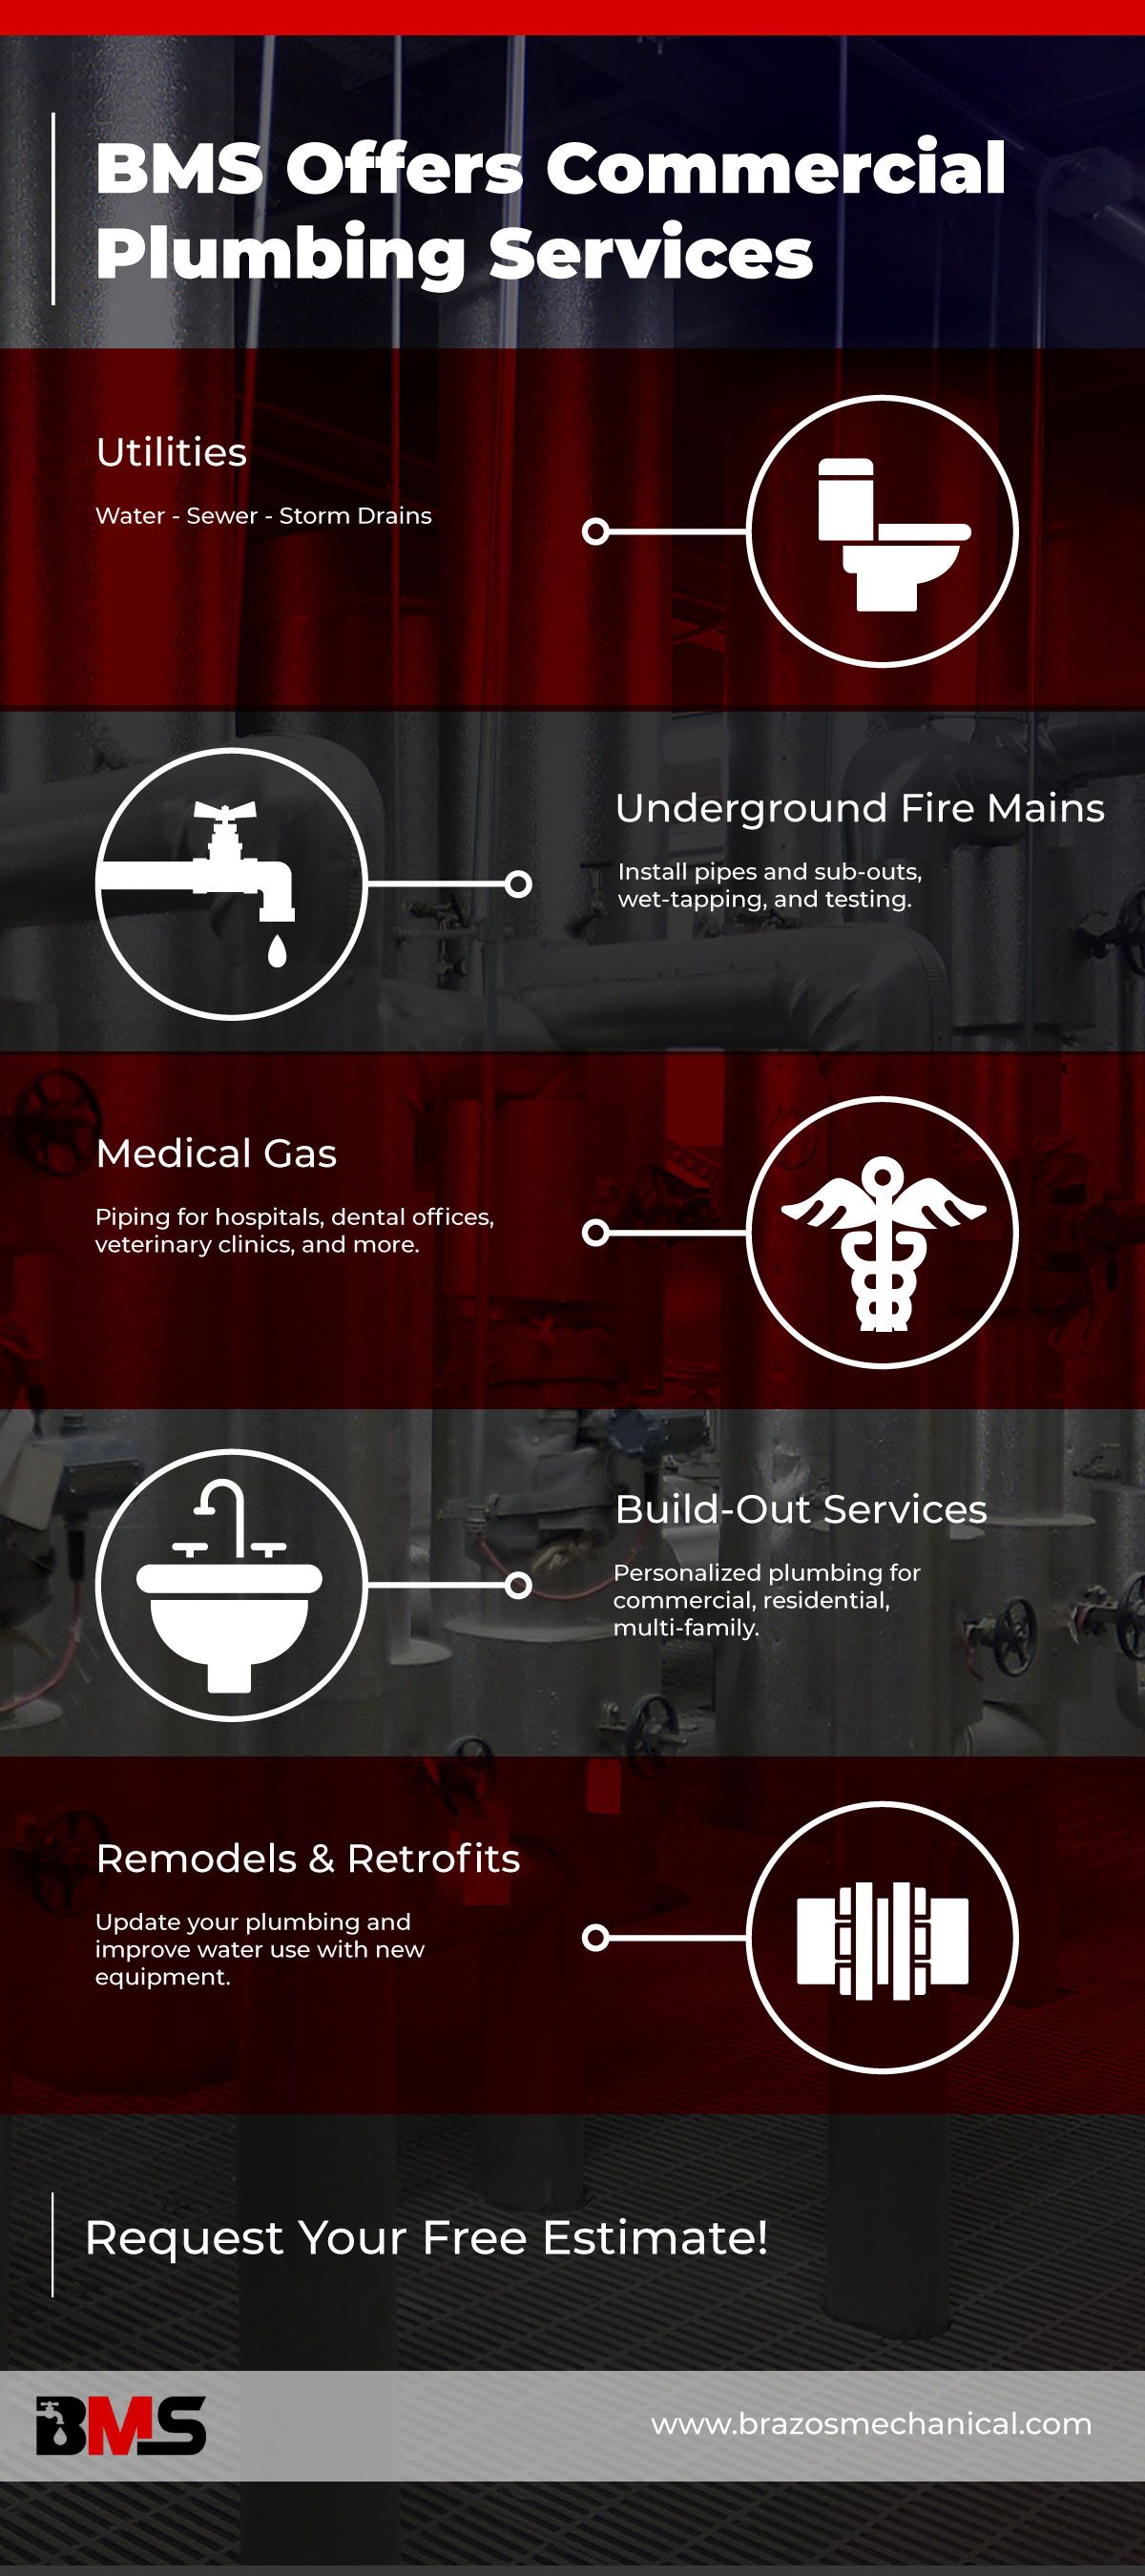 BMS-Offers-Commercial-Plumbing-Services2.jpg